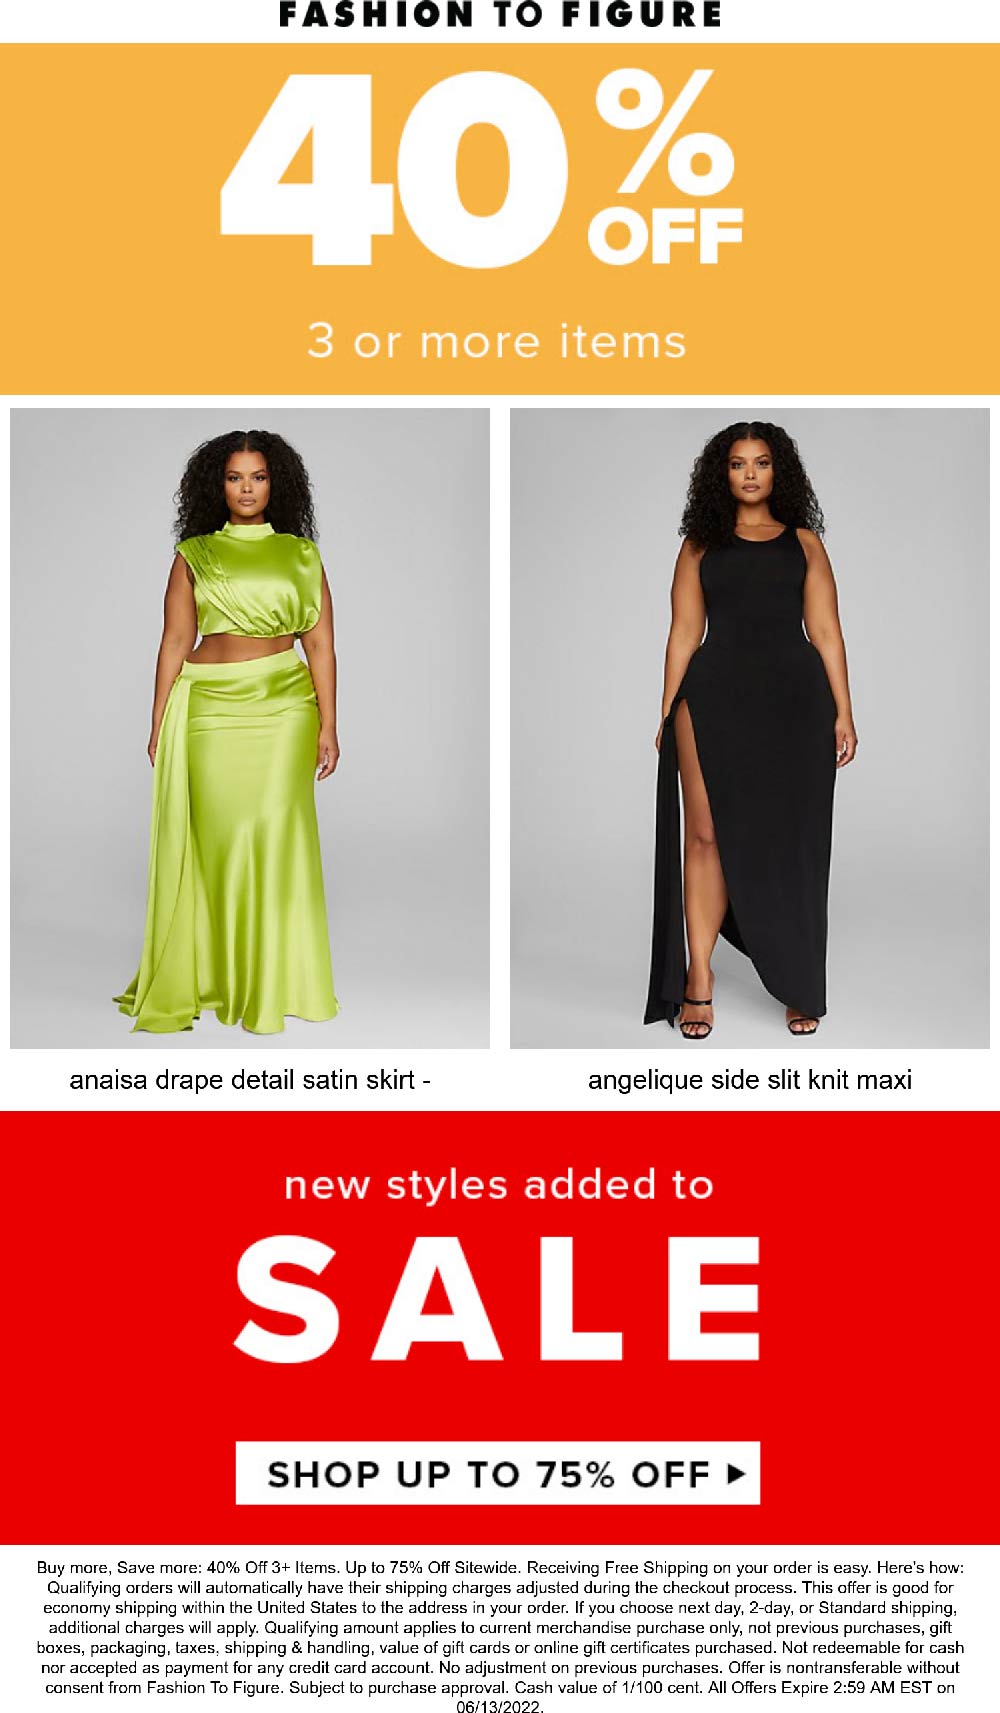 Fashion to Figure stores Coupon  40% off 3+ items at Fashion to Figure #fashiontofigure 